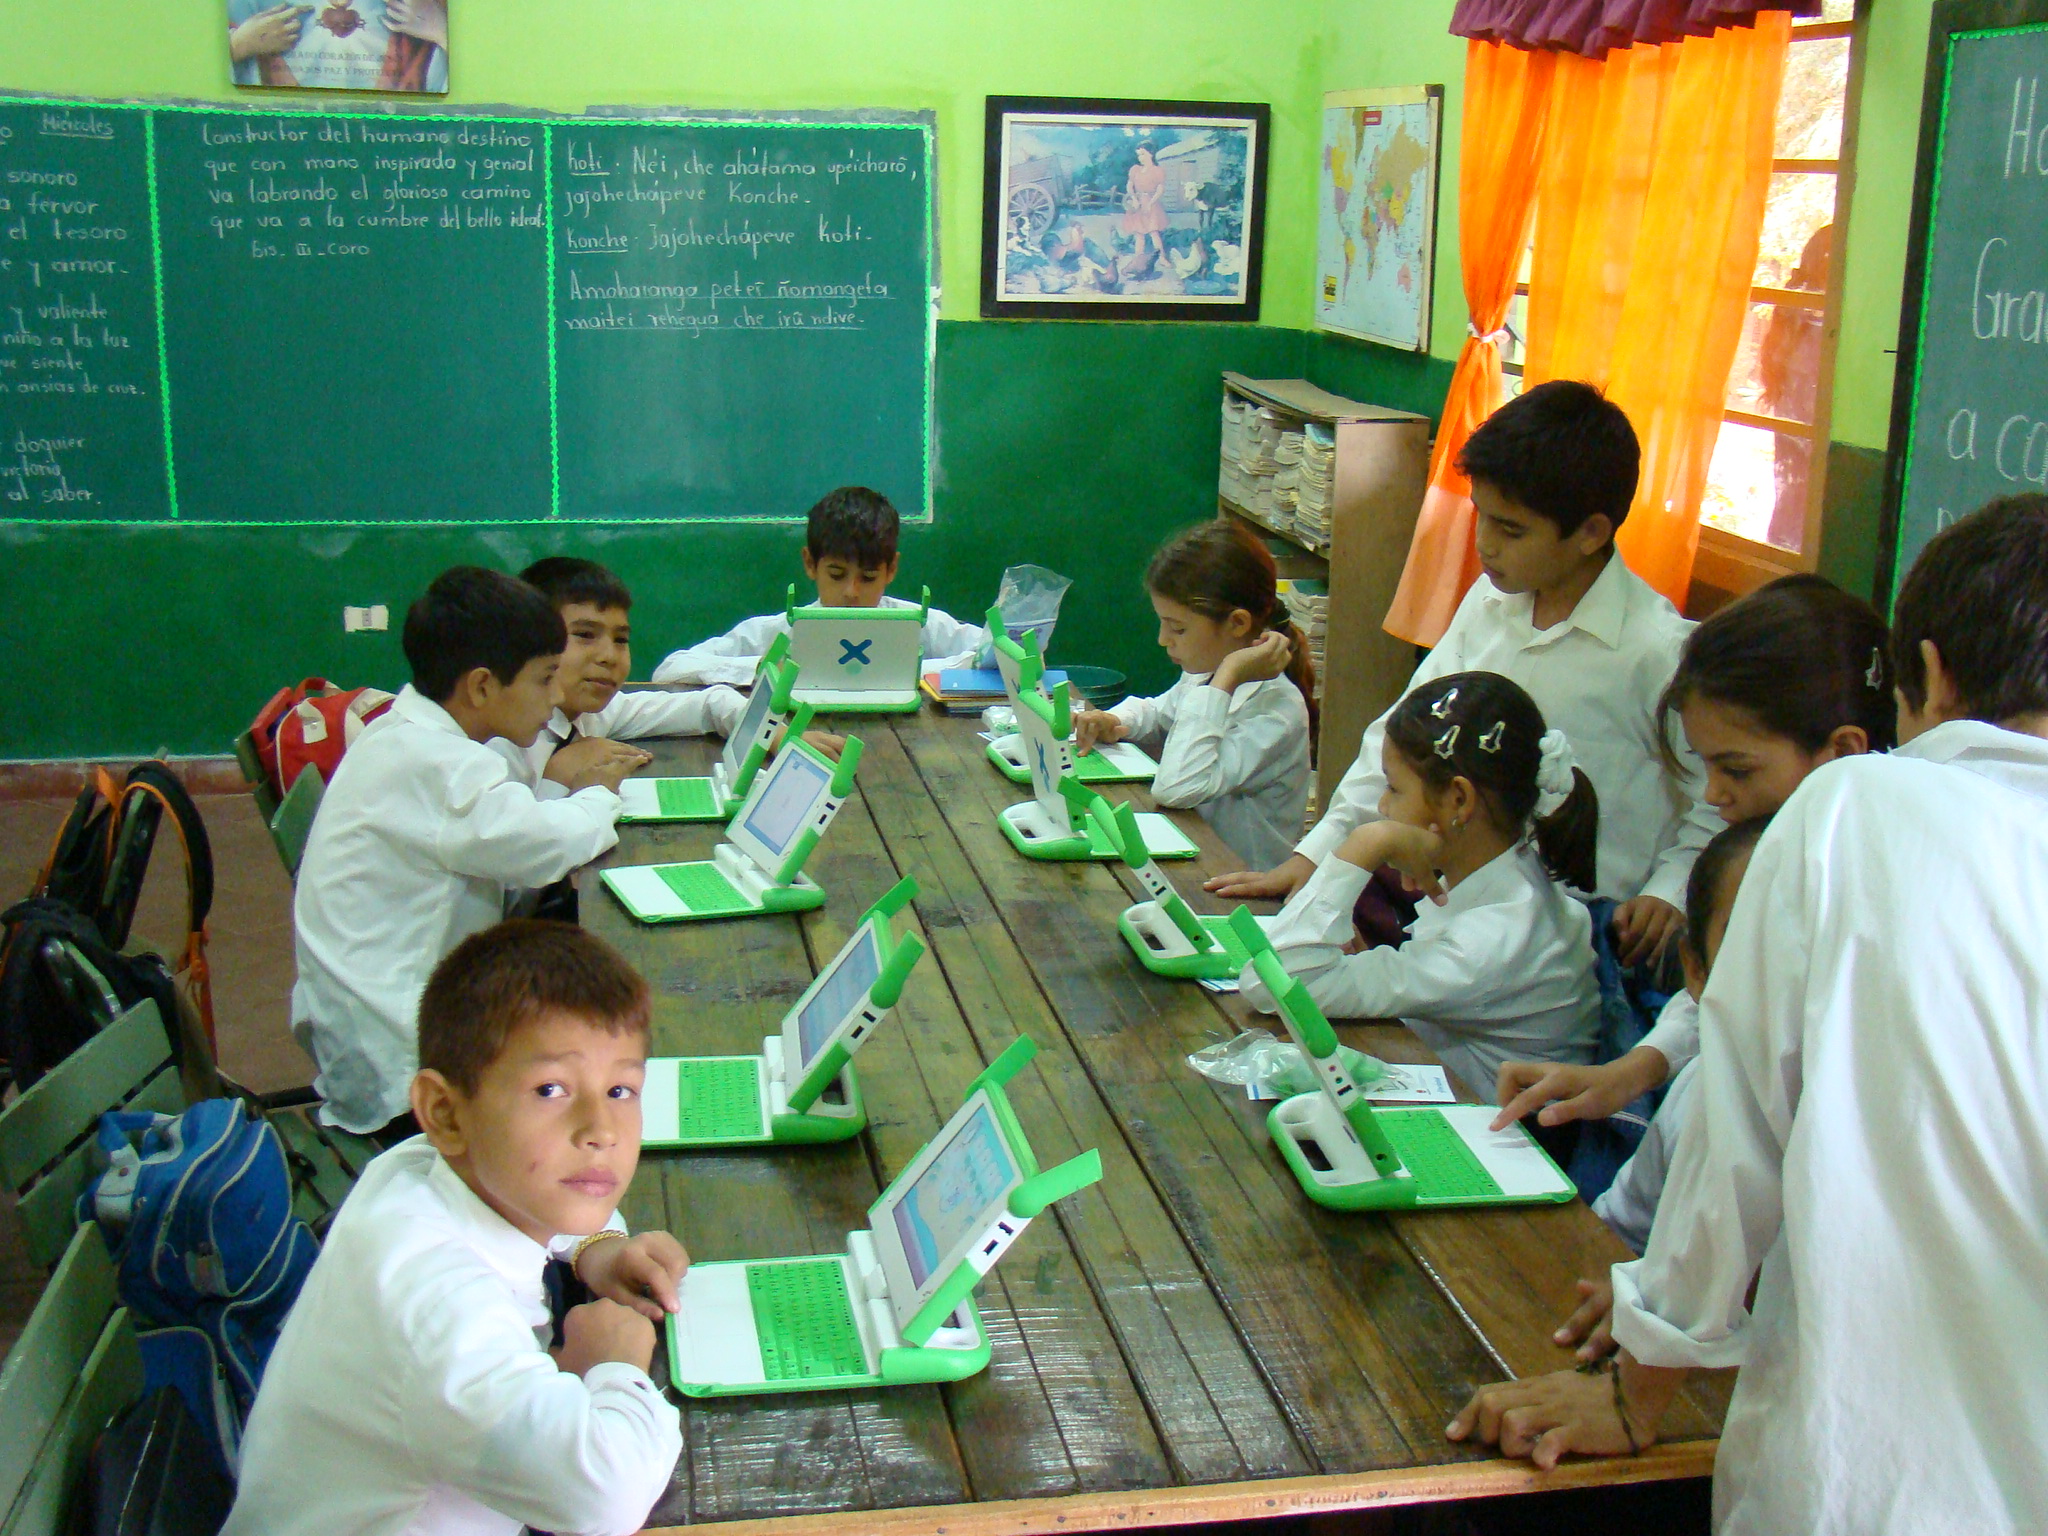 several children sitting at a wooden table in front of laptops